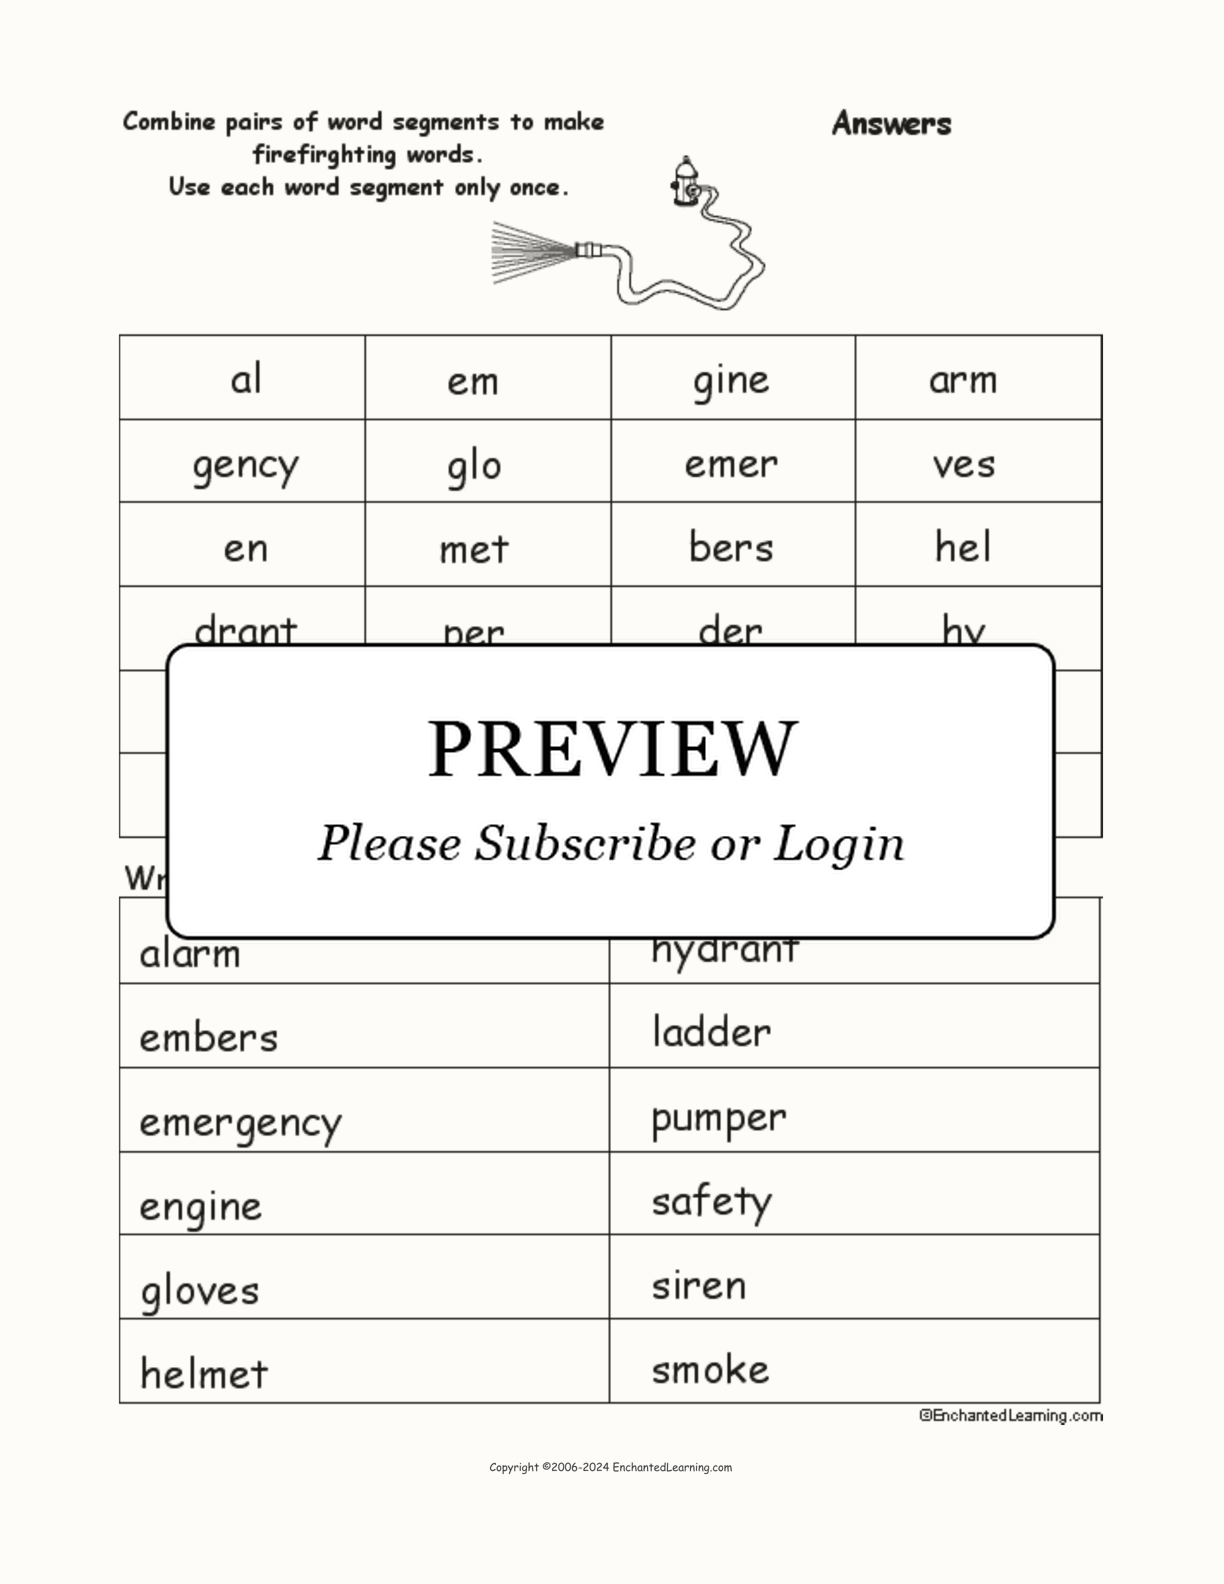 Firefighting Word Pieces Puzzle interactive worksheet page 2